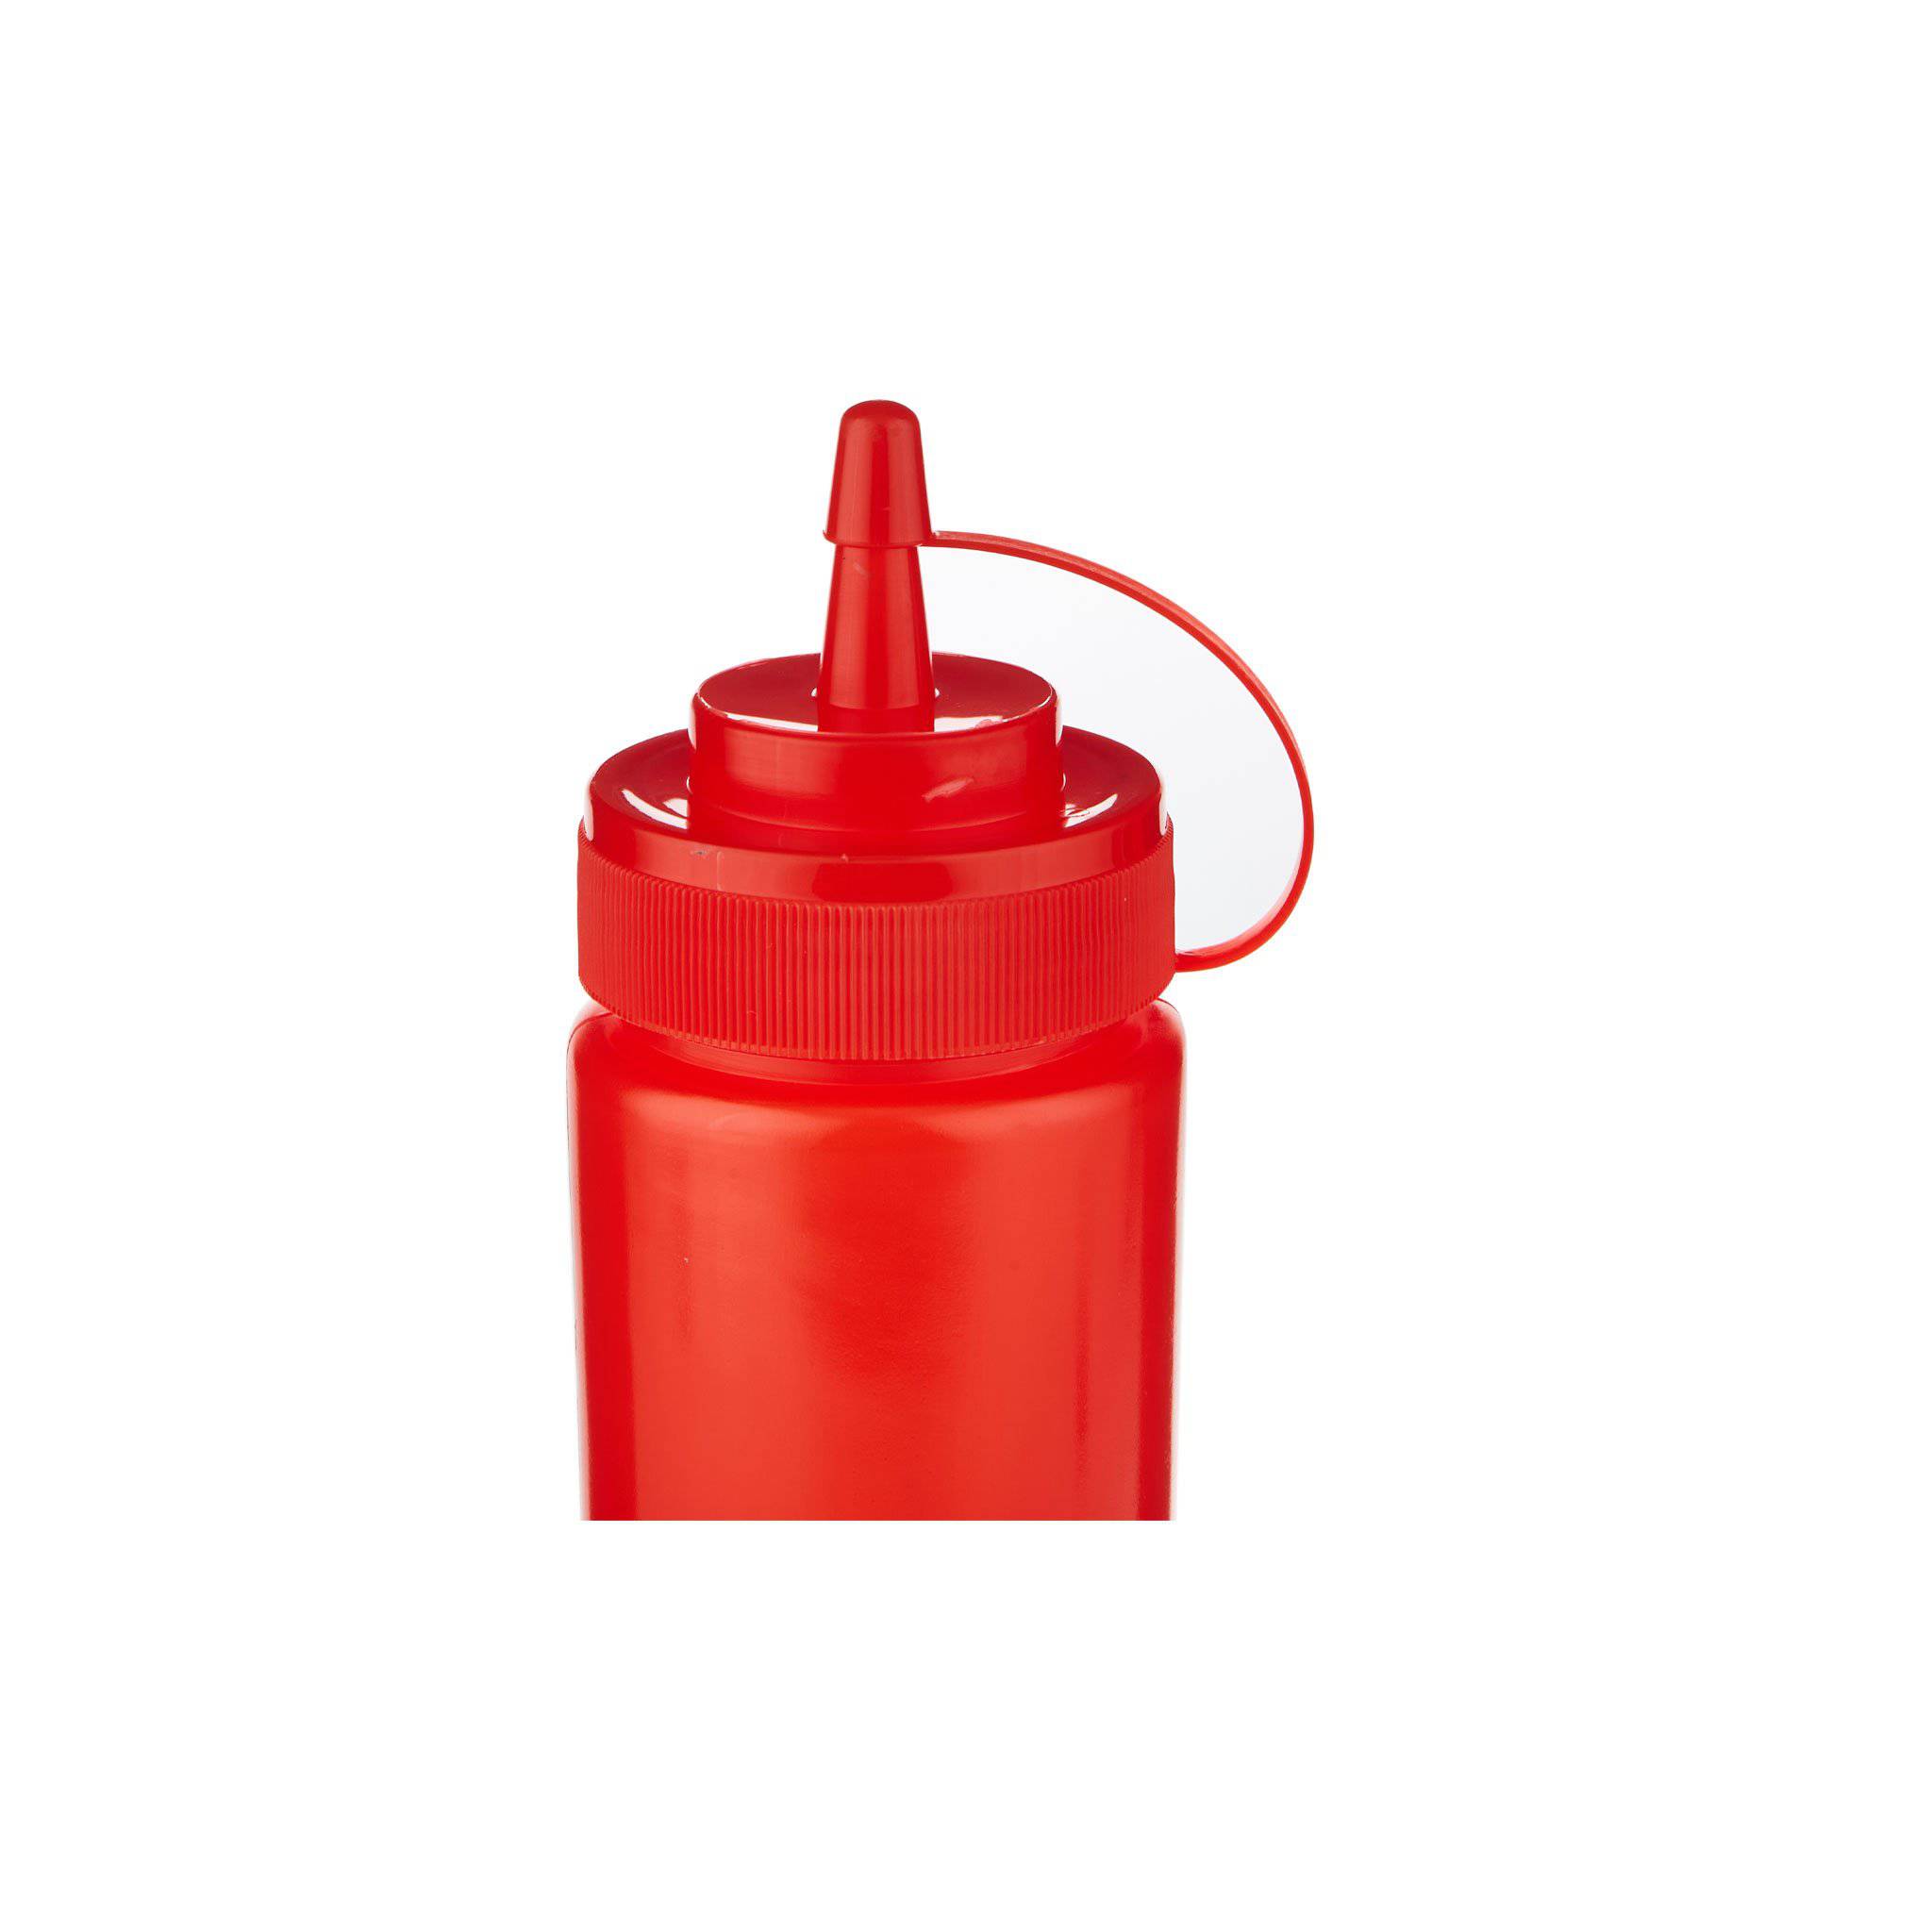 Red Squeeze Bottle 1 Piece - Hotpack Global